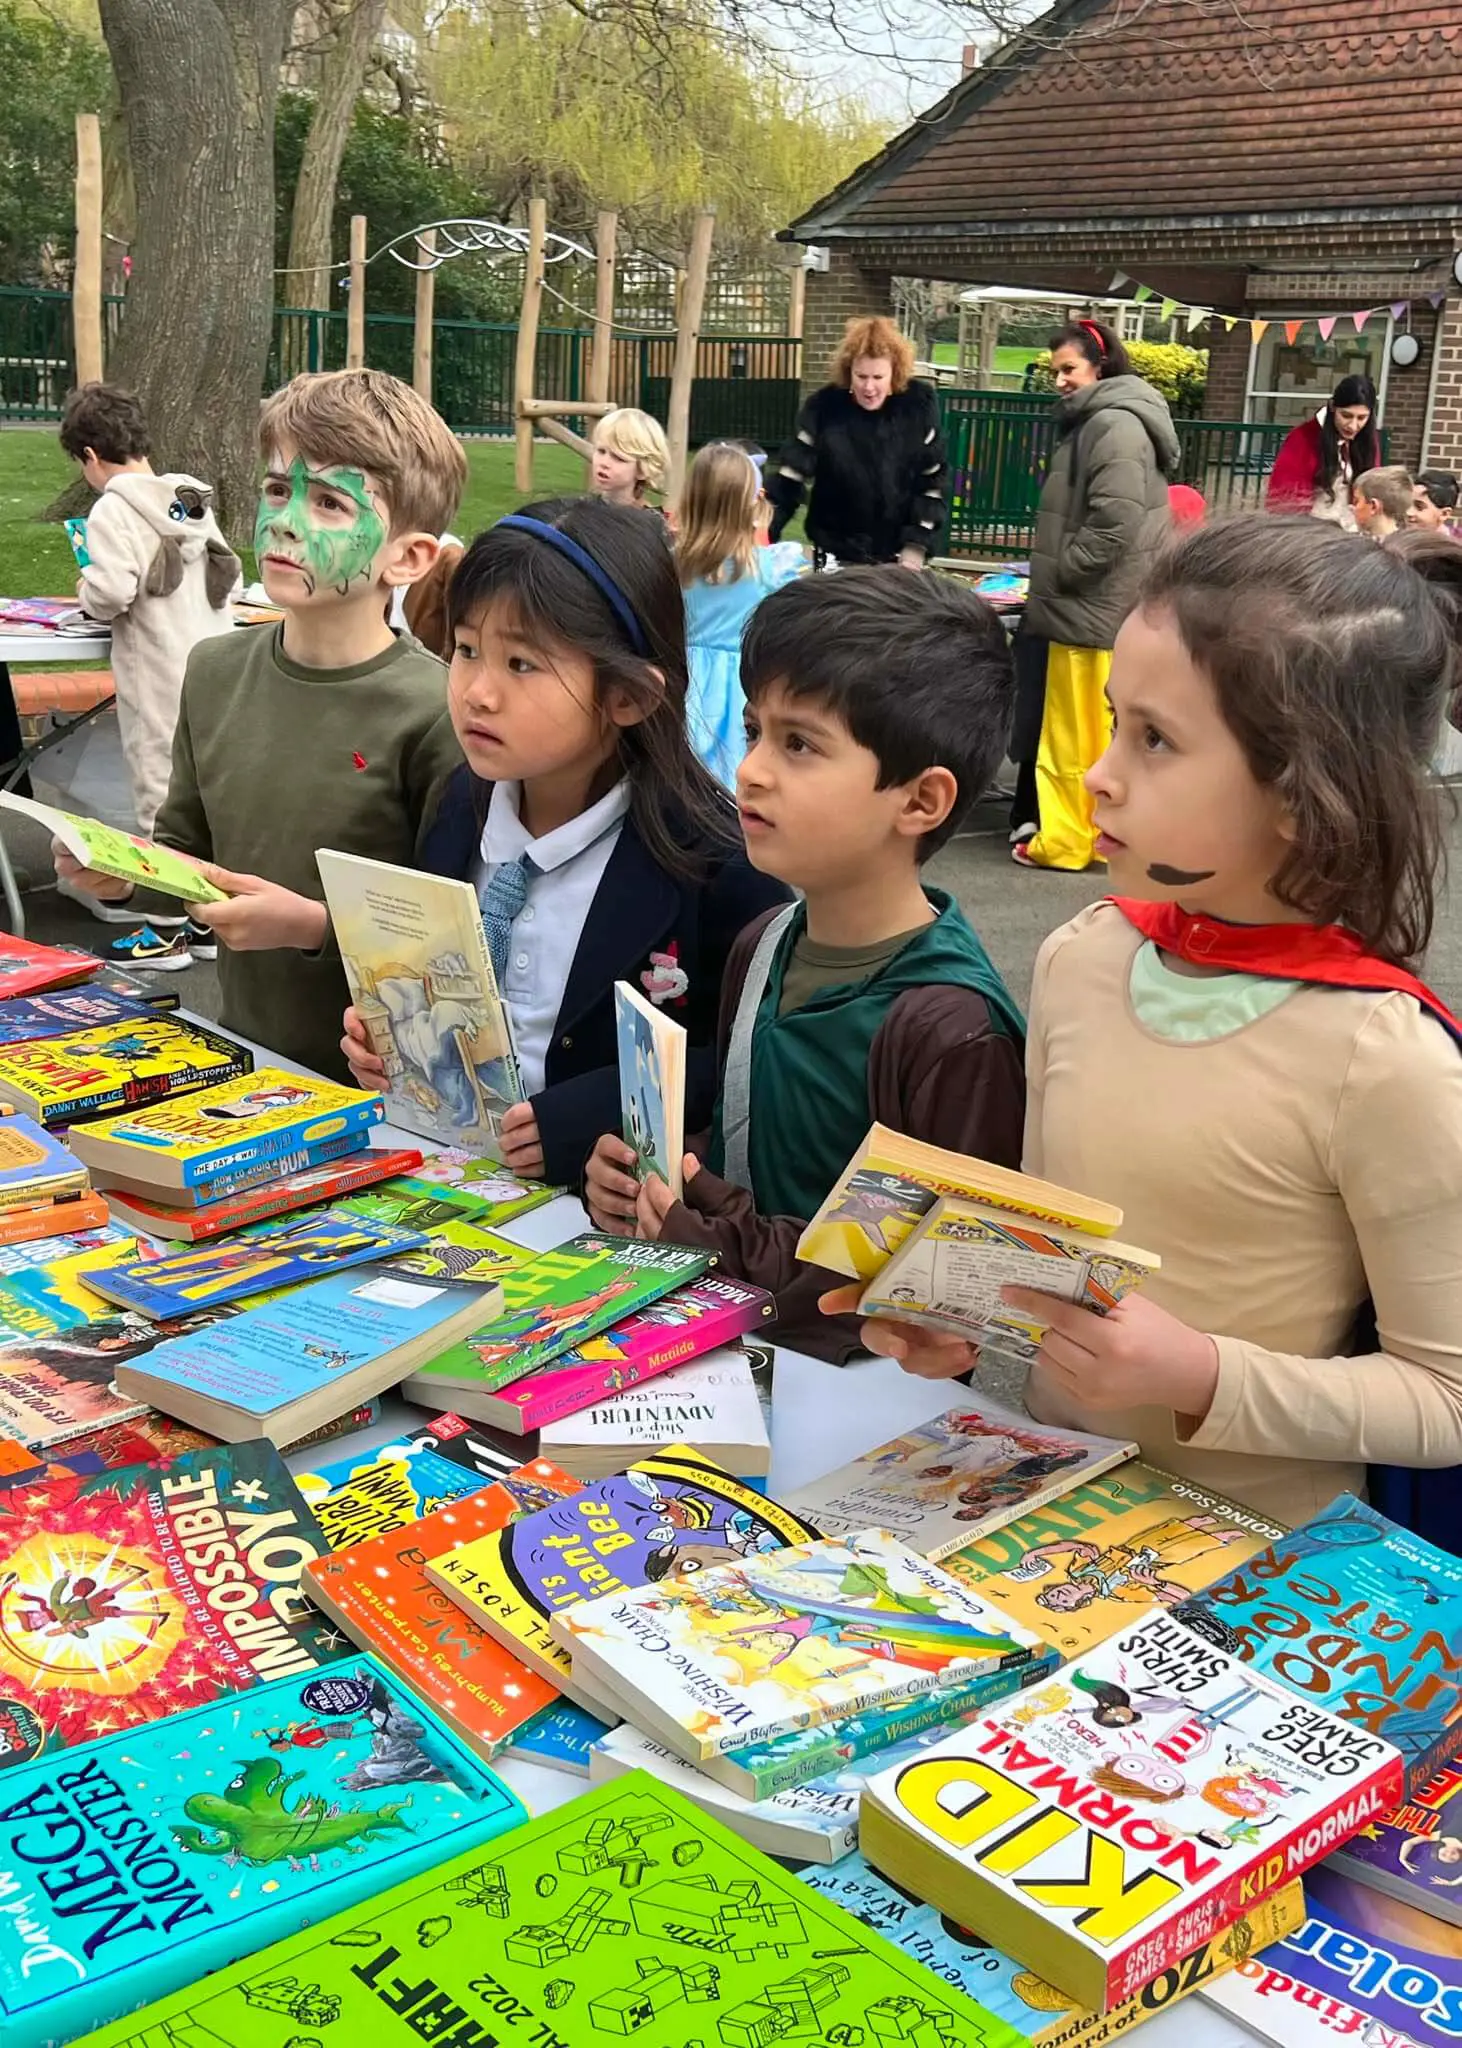 Pupils buying books at the school book sale for  world book day at Ibstock Place School, Roehampton, a private school near Richmond, Barnes, Putney, Kingston, & Wandsworth